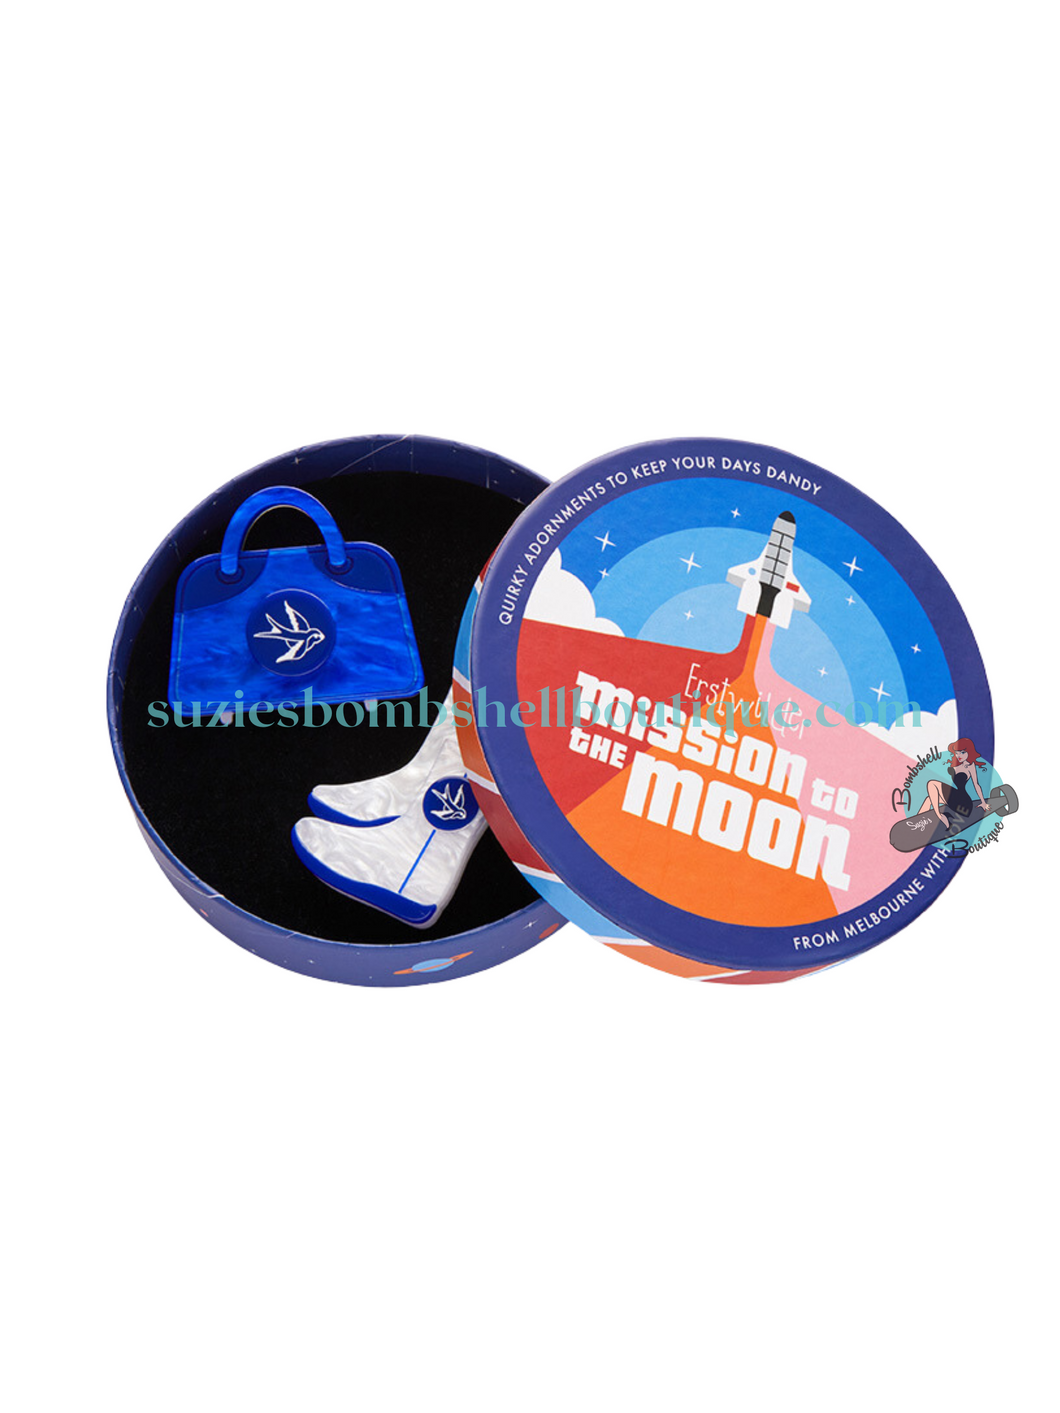 Erstwilder Mission To The Moon Space Chic Souvenirs Double Brooch set of two acrylic resin pins of space boots and travel case retro vintage pinup 50s 60s costume jewellery pinup Canadian Pin-Up Shop Suzie's Bombshell Boutique